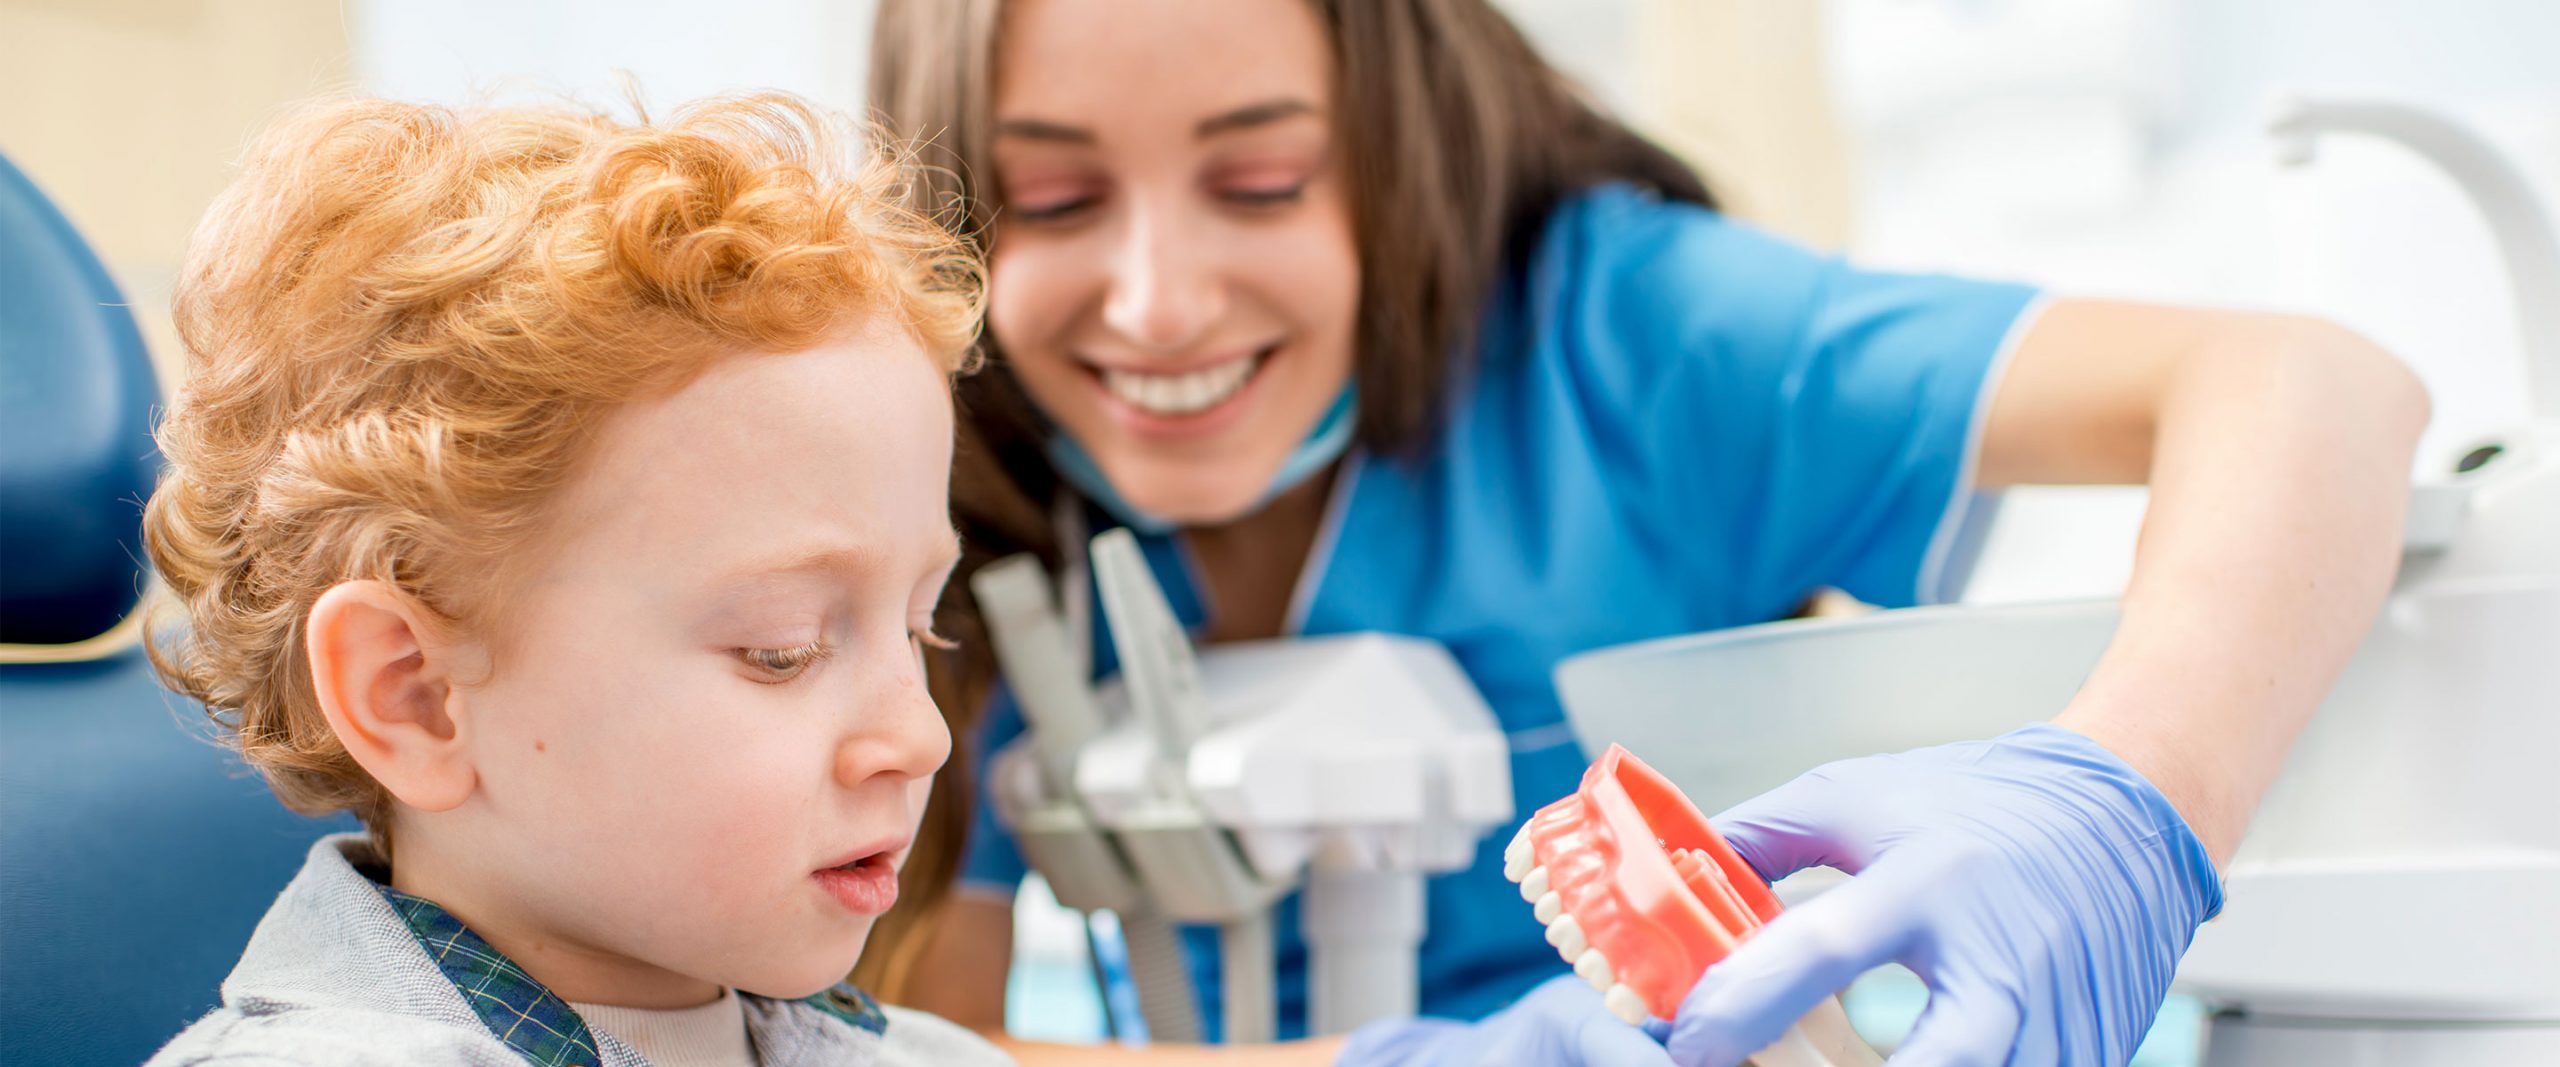 A red haired child looks at a mold of teeth with his dental hygenist